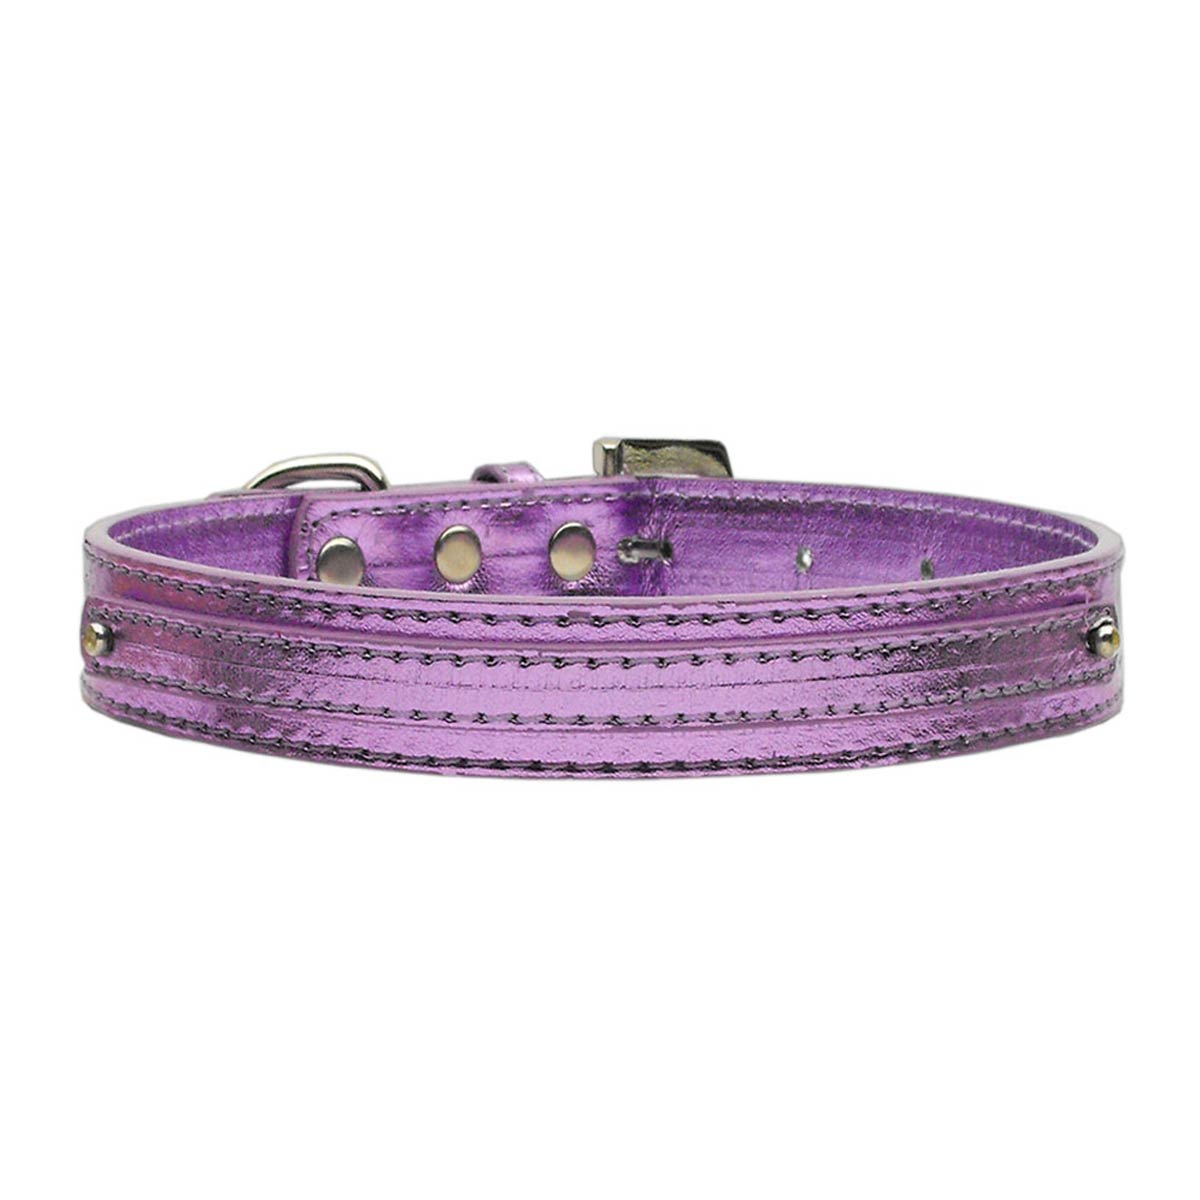 Metallic Two Tiered Dog Collar with 10MM Letter Strap - Purple